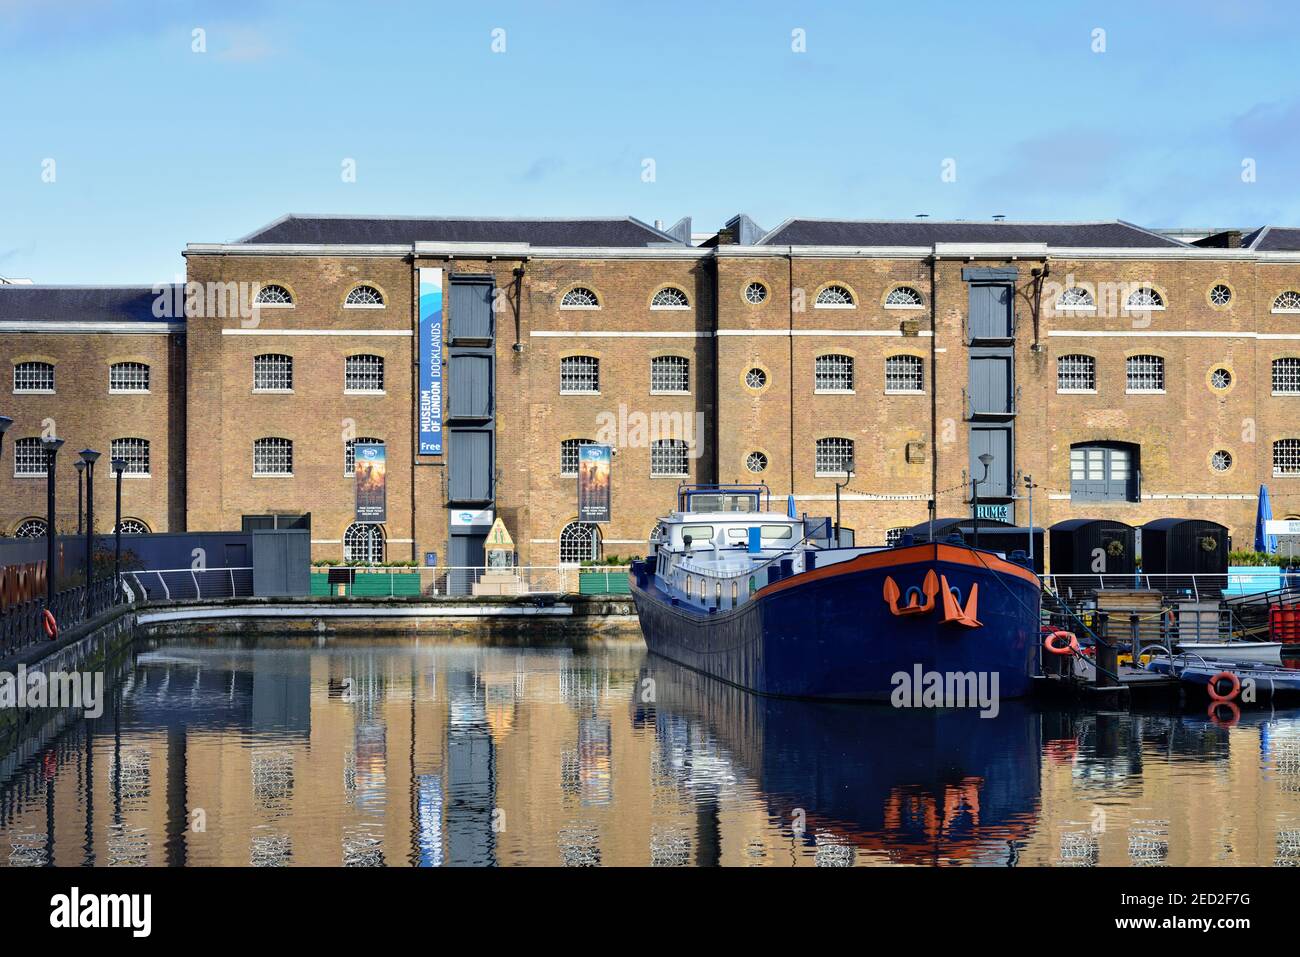 Museum of London Docklands, West India Quay, North Dock, Canary Wharf, Docklands, London, United Kingdom Stock Photo